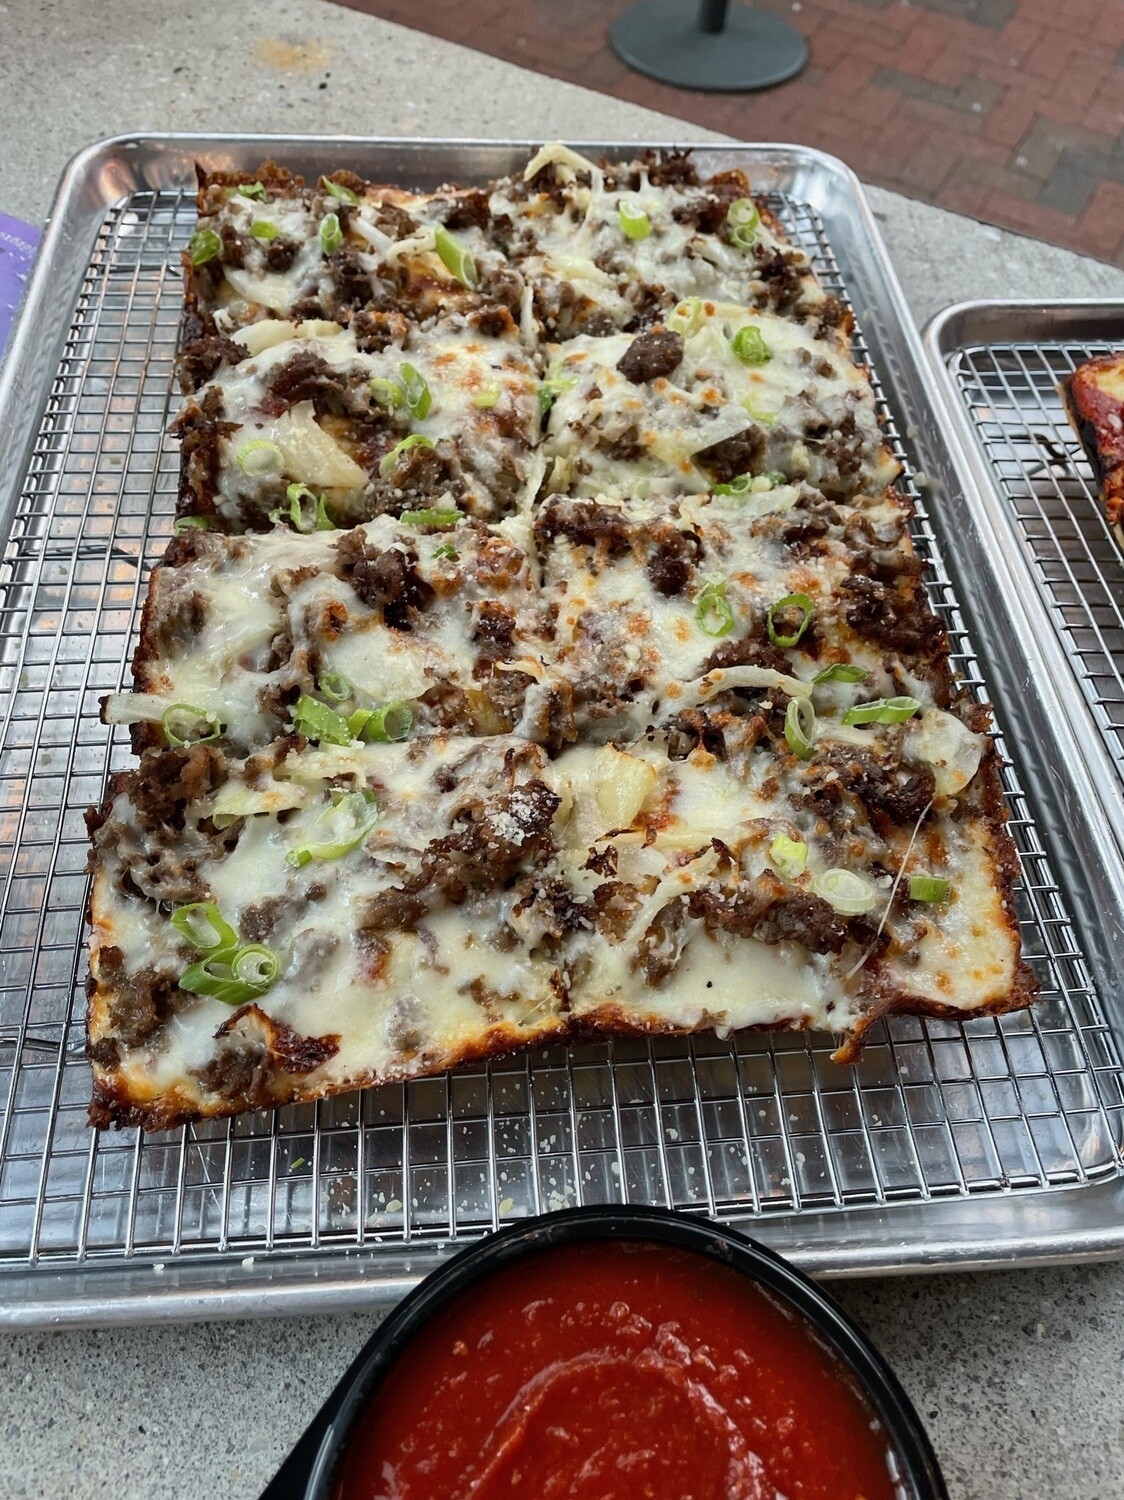 The Jawn (Cheesesteak Pizza)